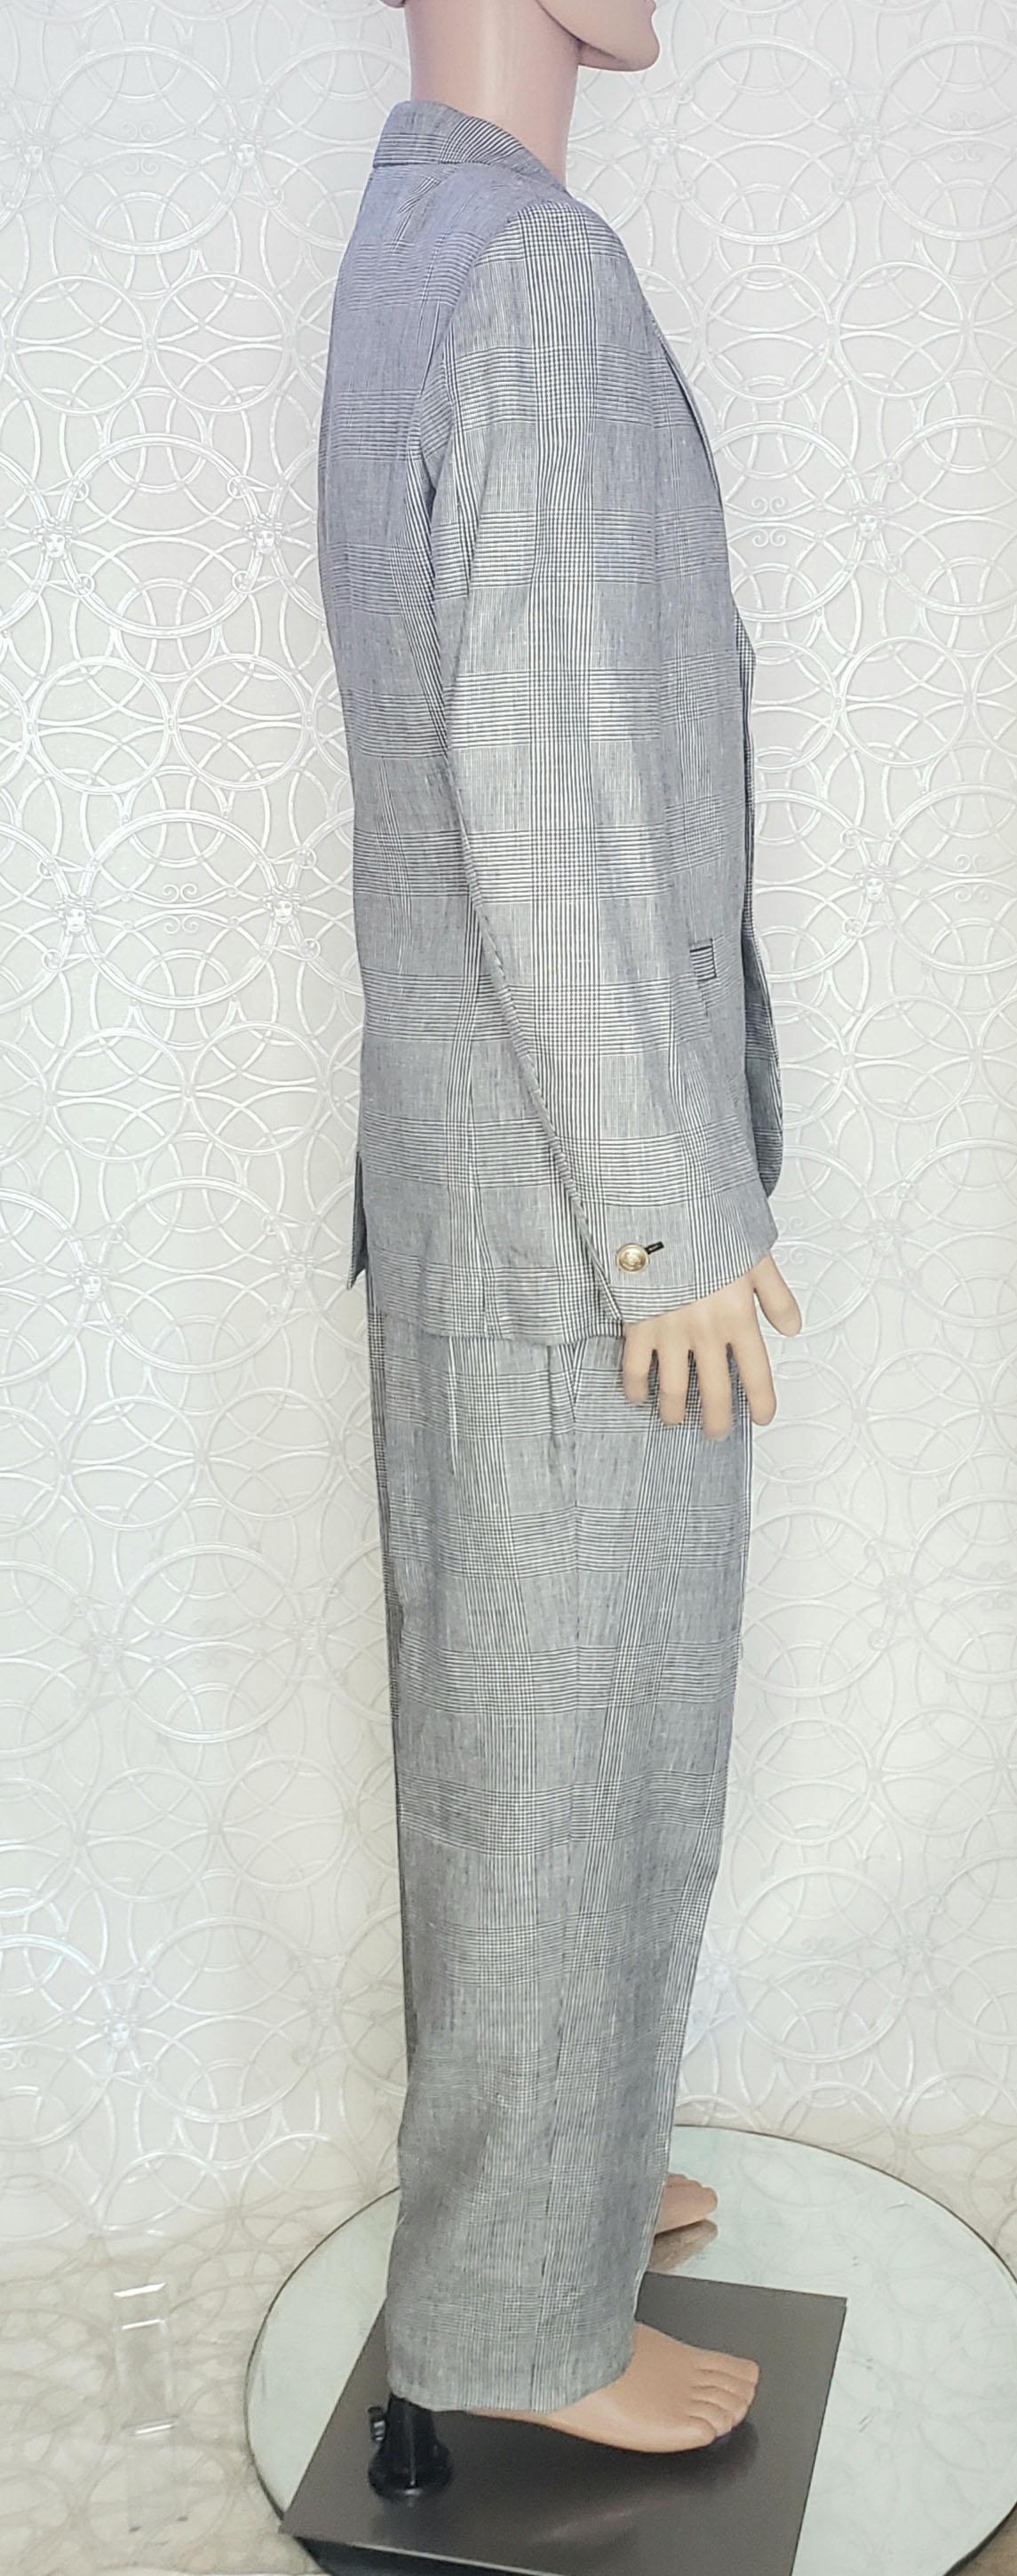 VERSACE S/S 2012 look # 2 BRAND NEW GRAY SUIT 48 - 38 (M) For Sale 3